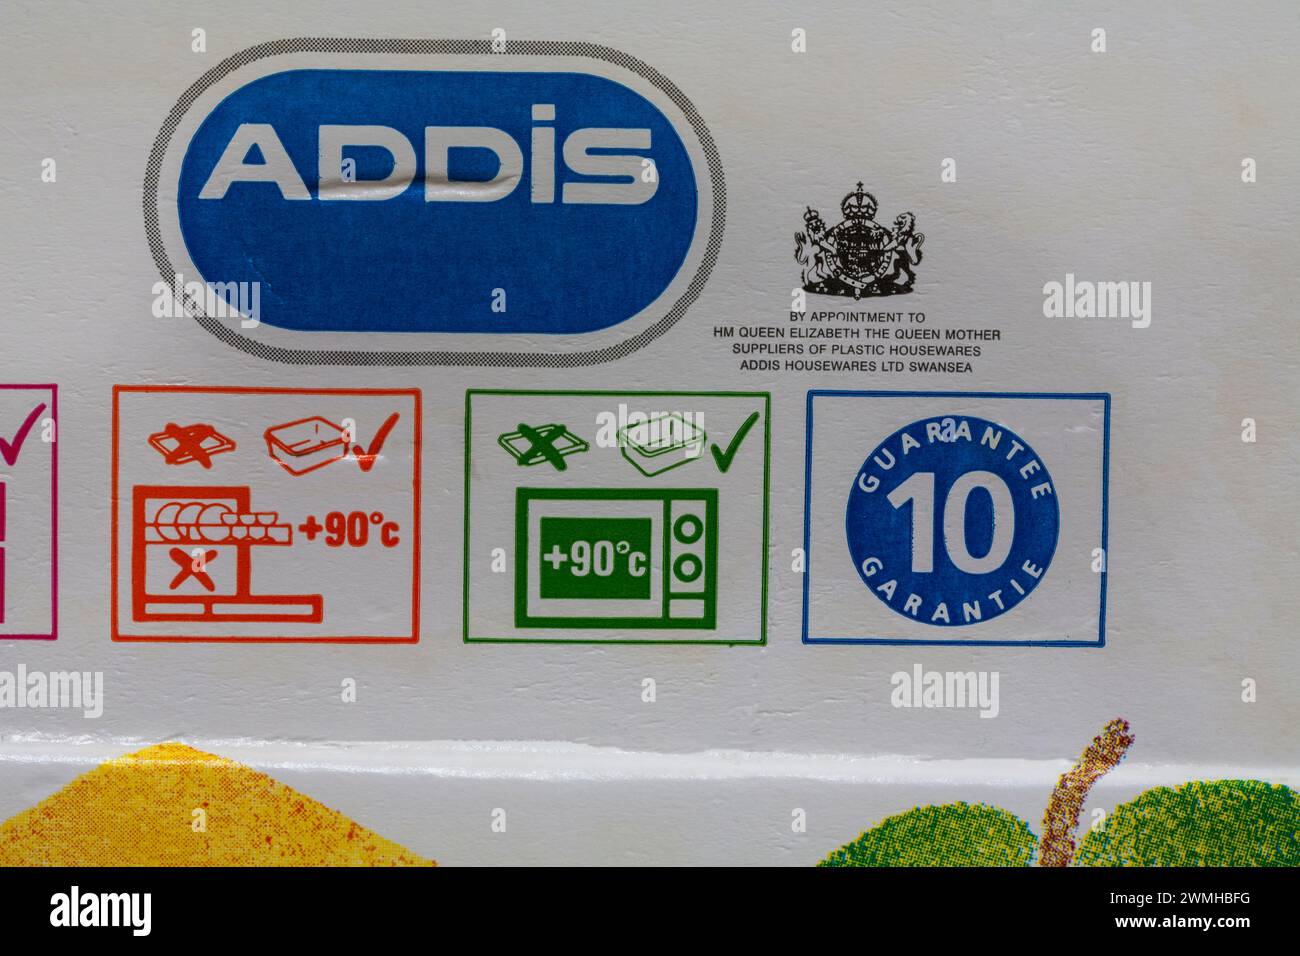 dishwasher and microwave symbols with detail on Addis plastic food container with care and use usage symbols information - Royal Warrant Stock Photo